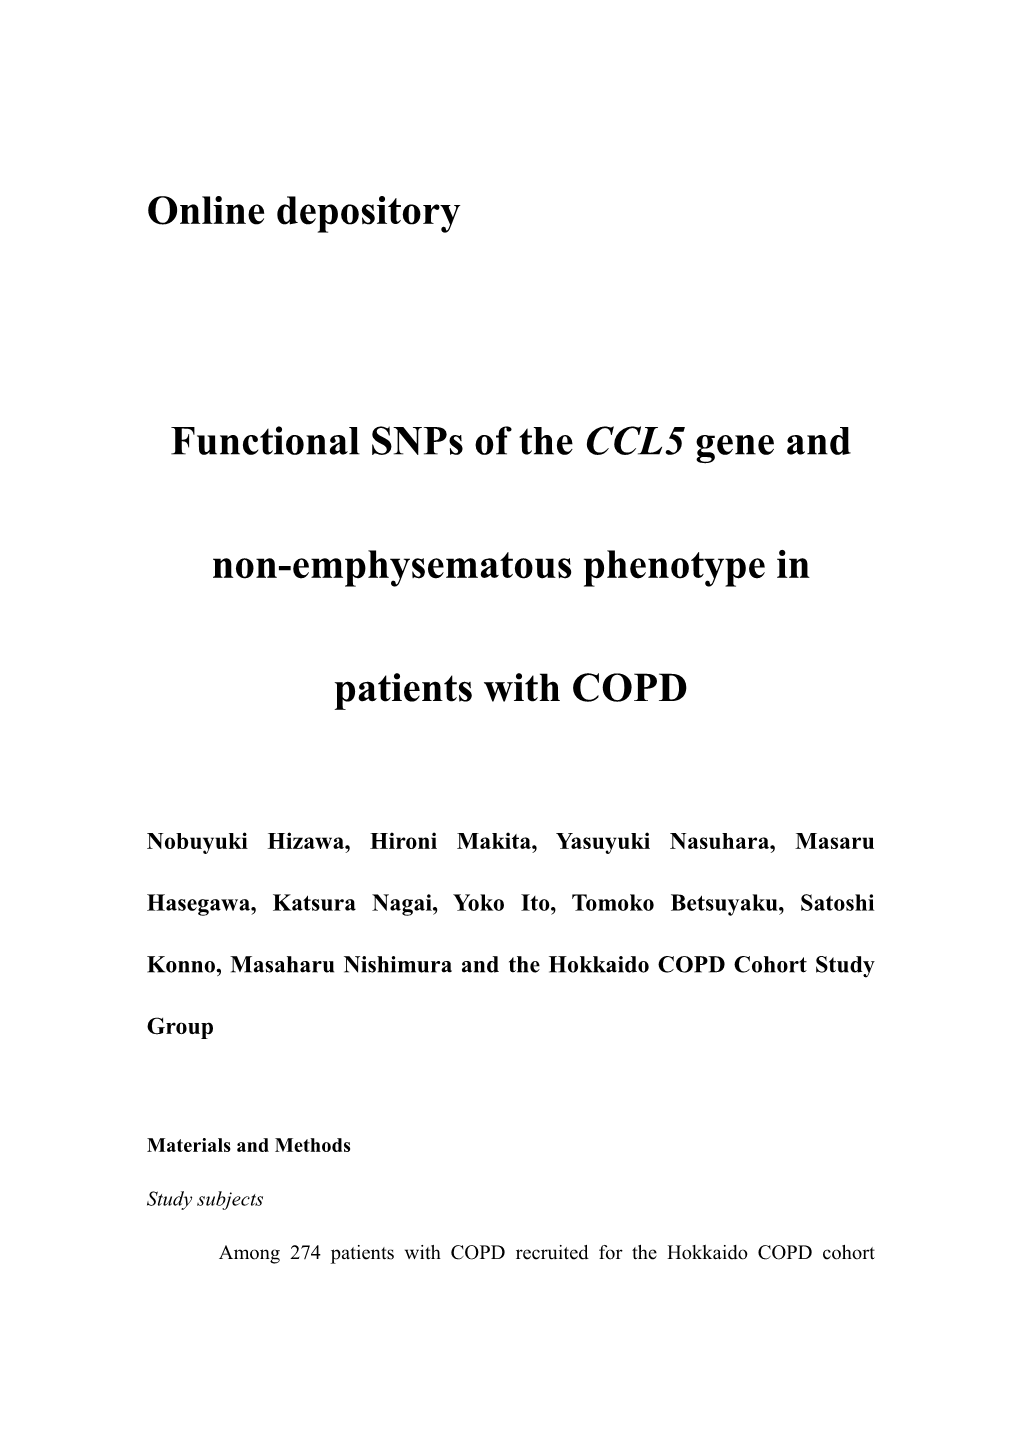 Functional Snps of the CCL5 Gene and Non-Emphysematous Phenotype in Patients with COPD